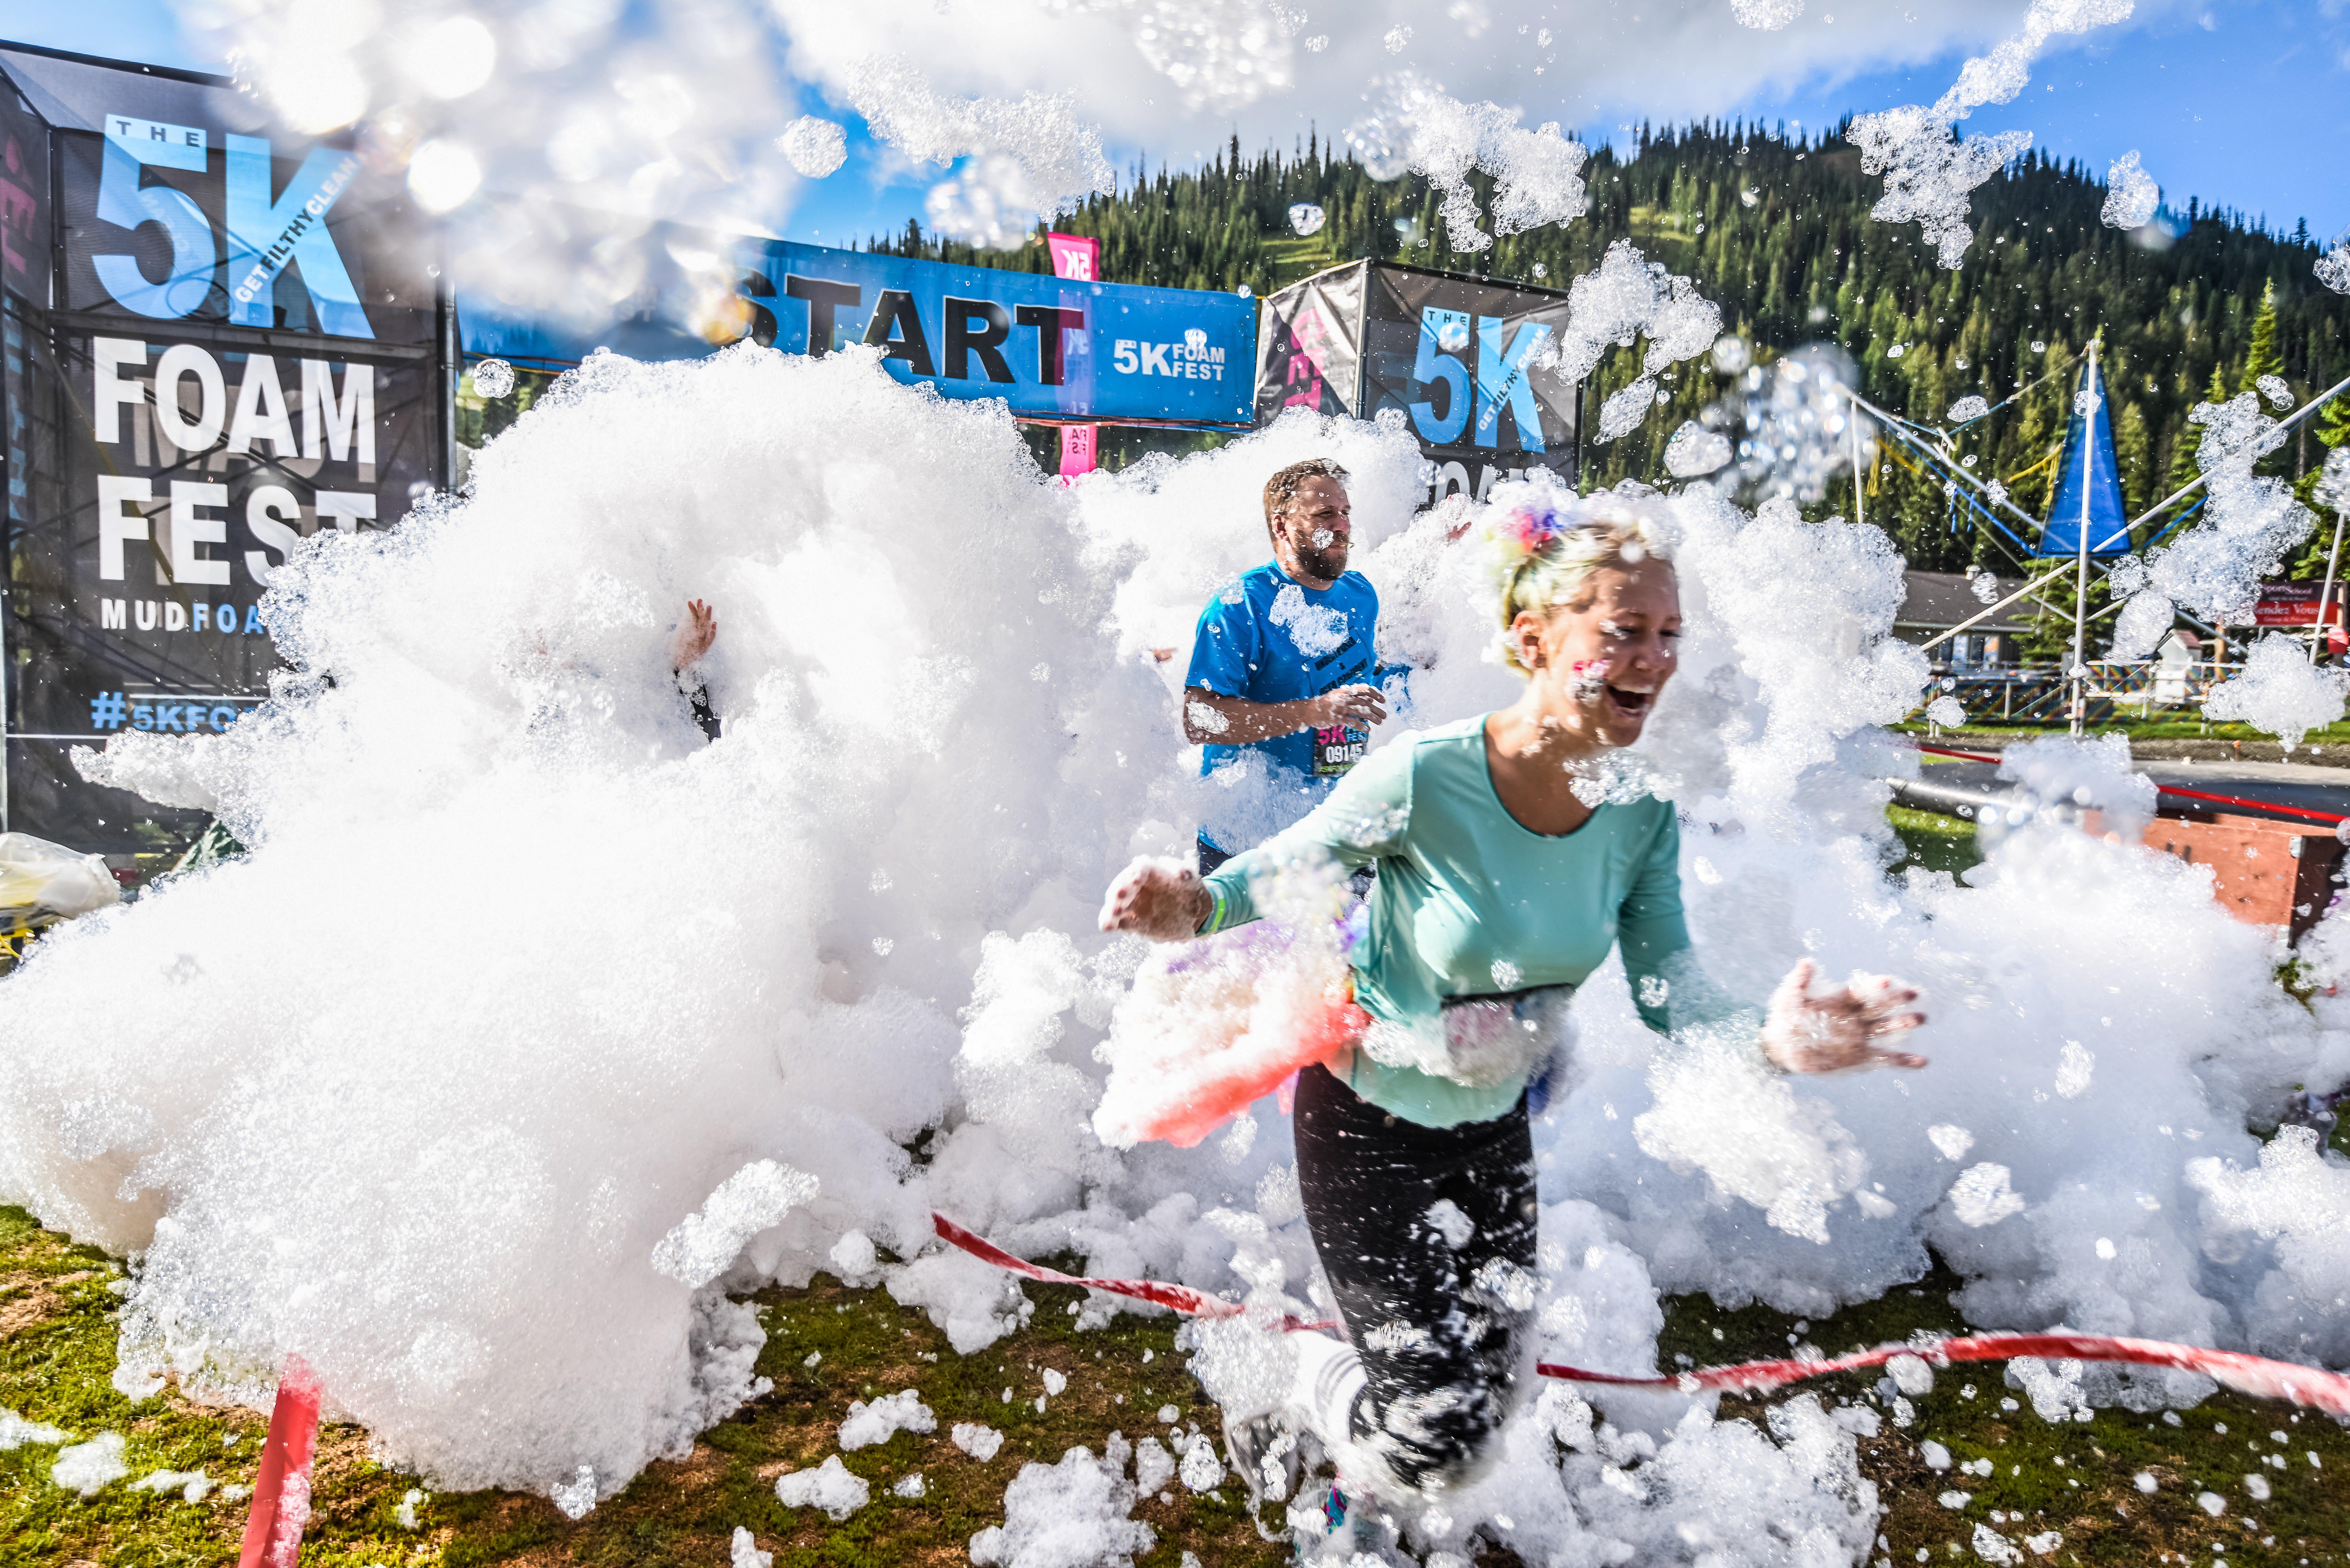 The 5K Foam Fest - Perth - Pubs and Clubs